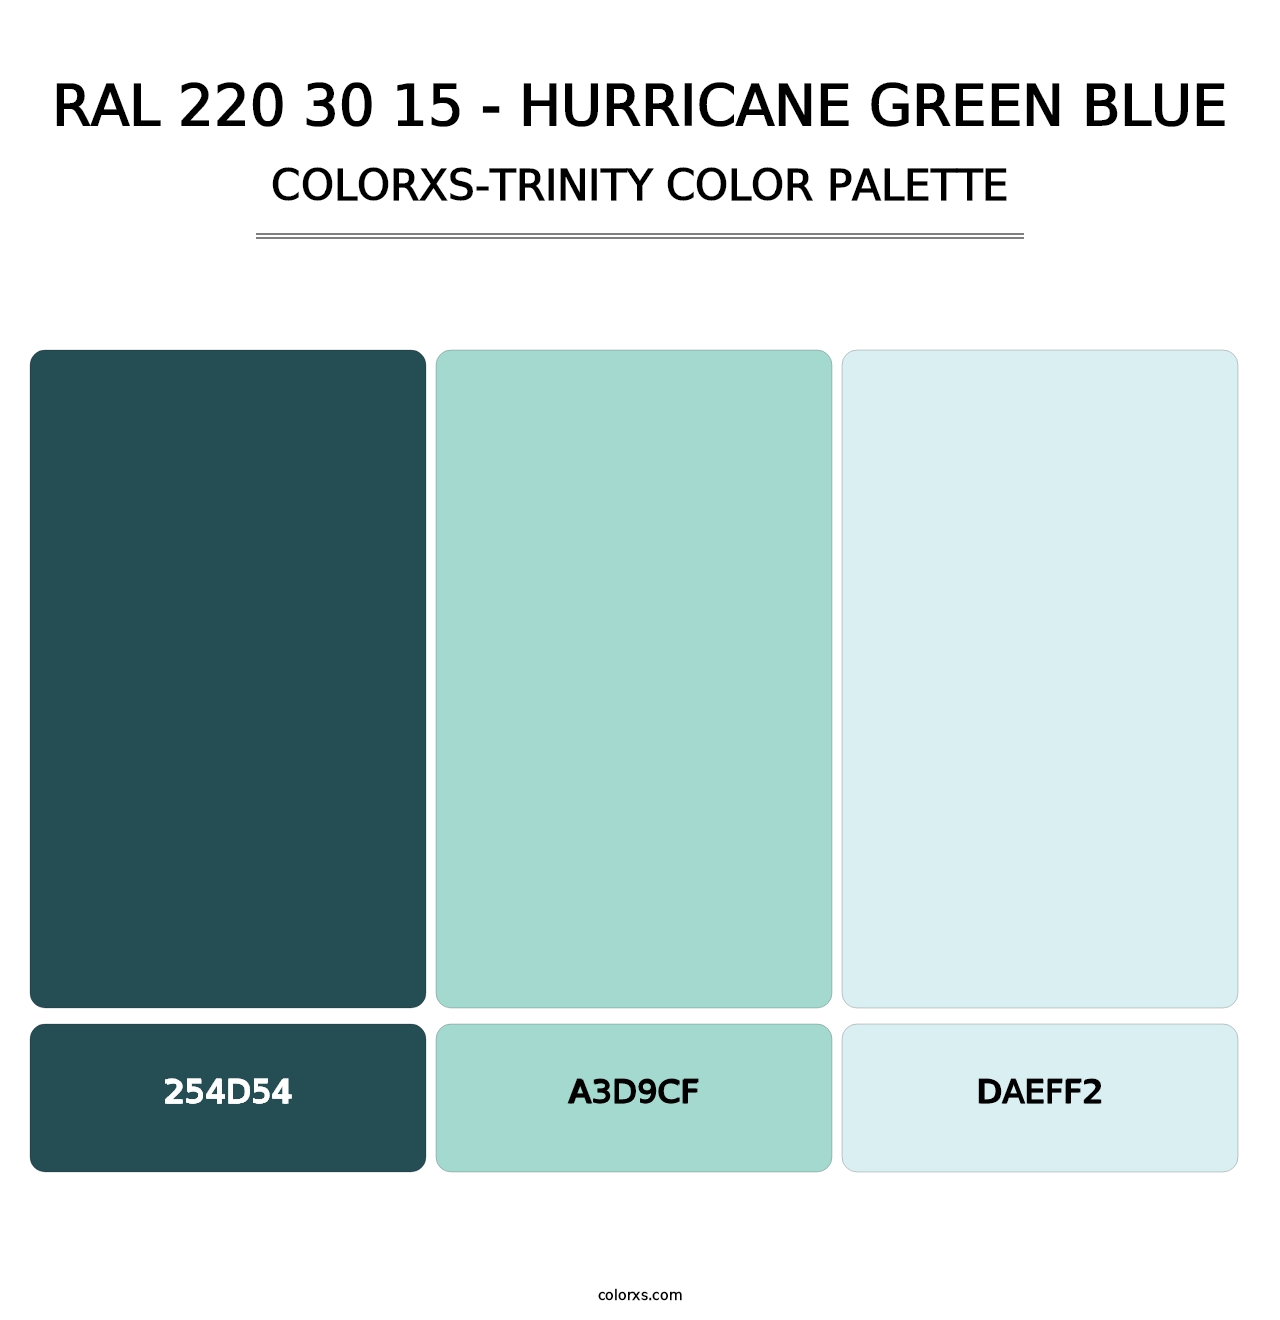 RAL 220 30 15 - Hurricane Green Blue - Colorxs Trinity Palette